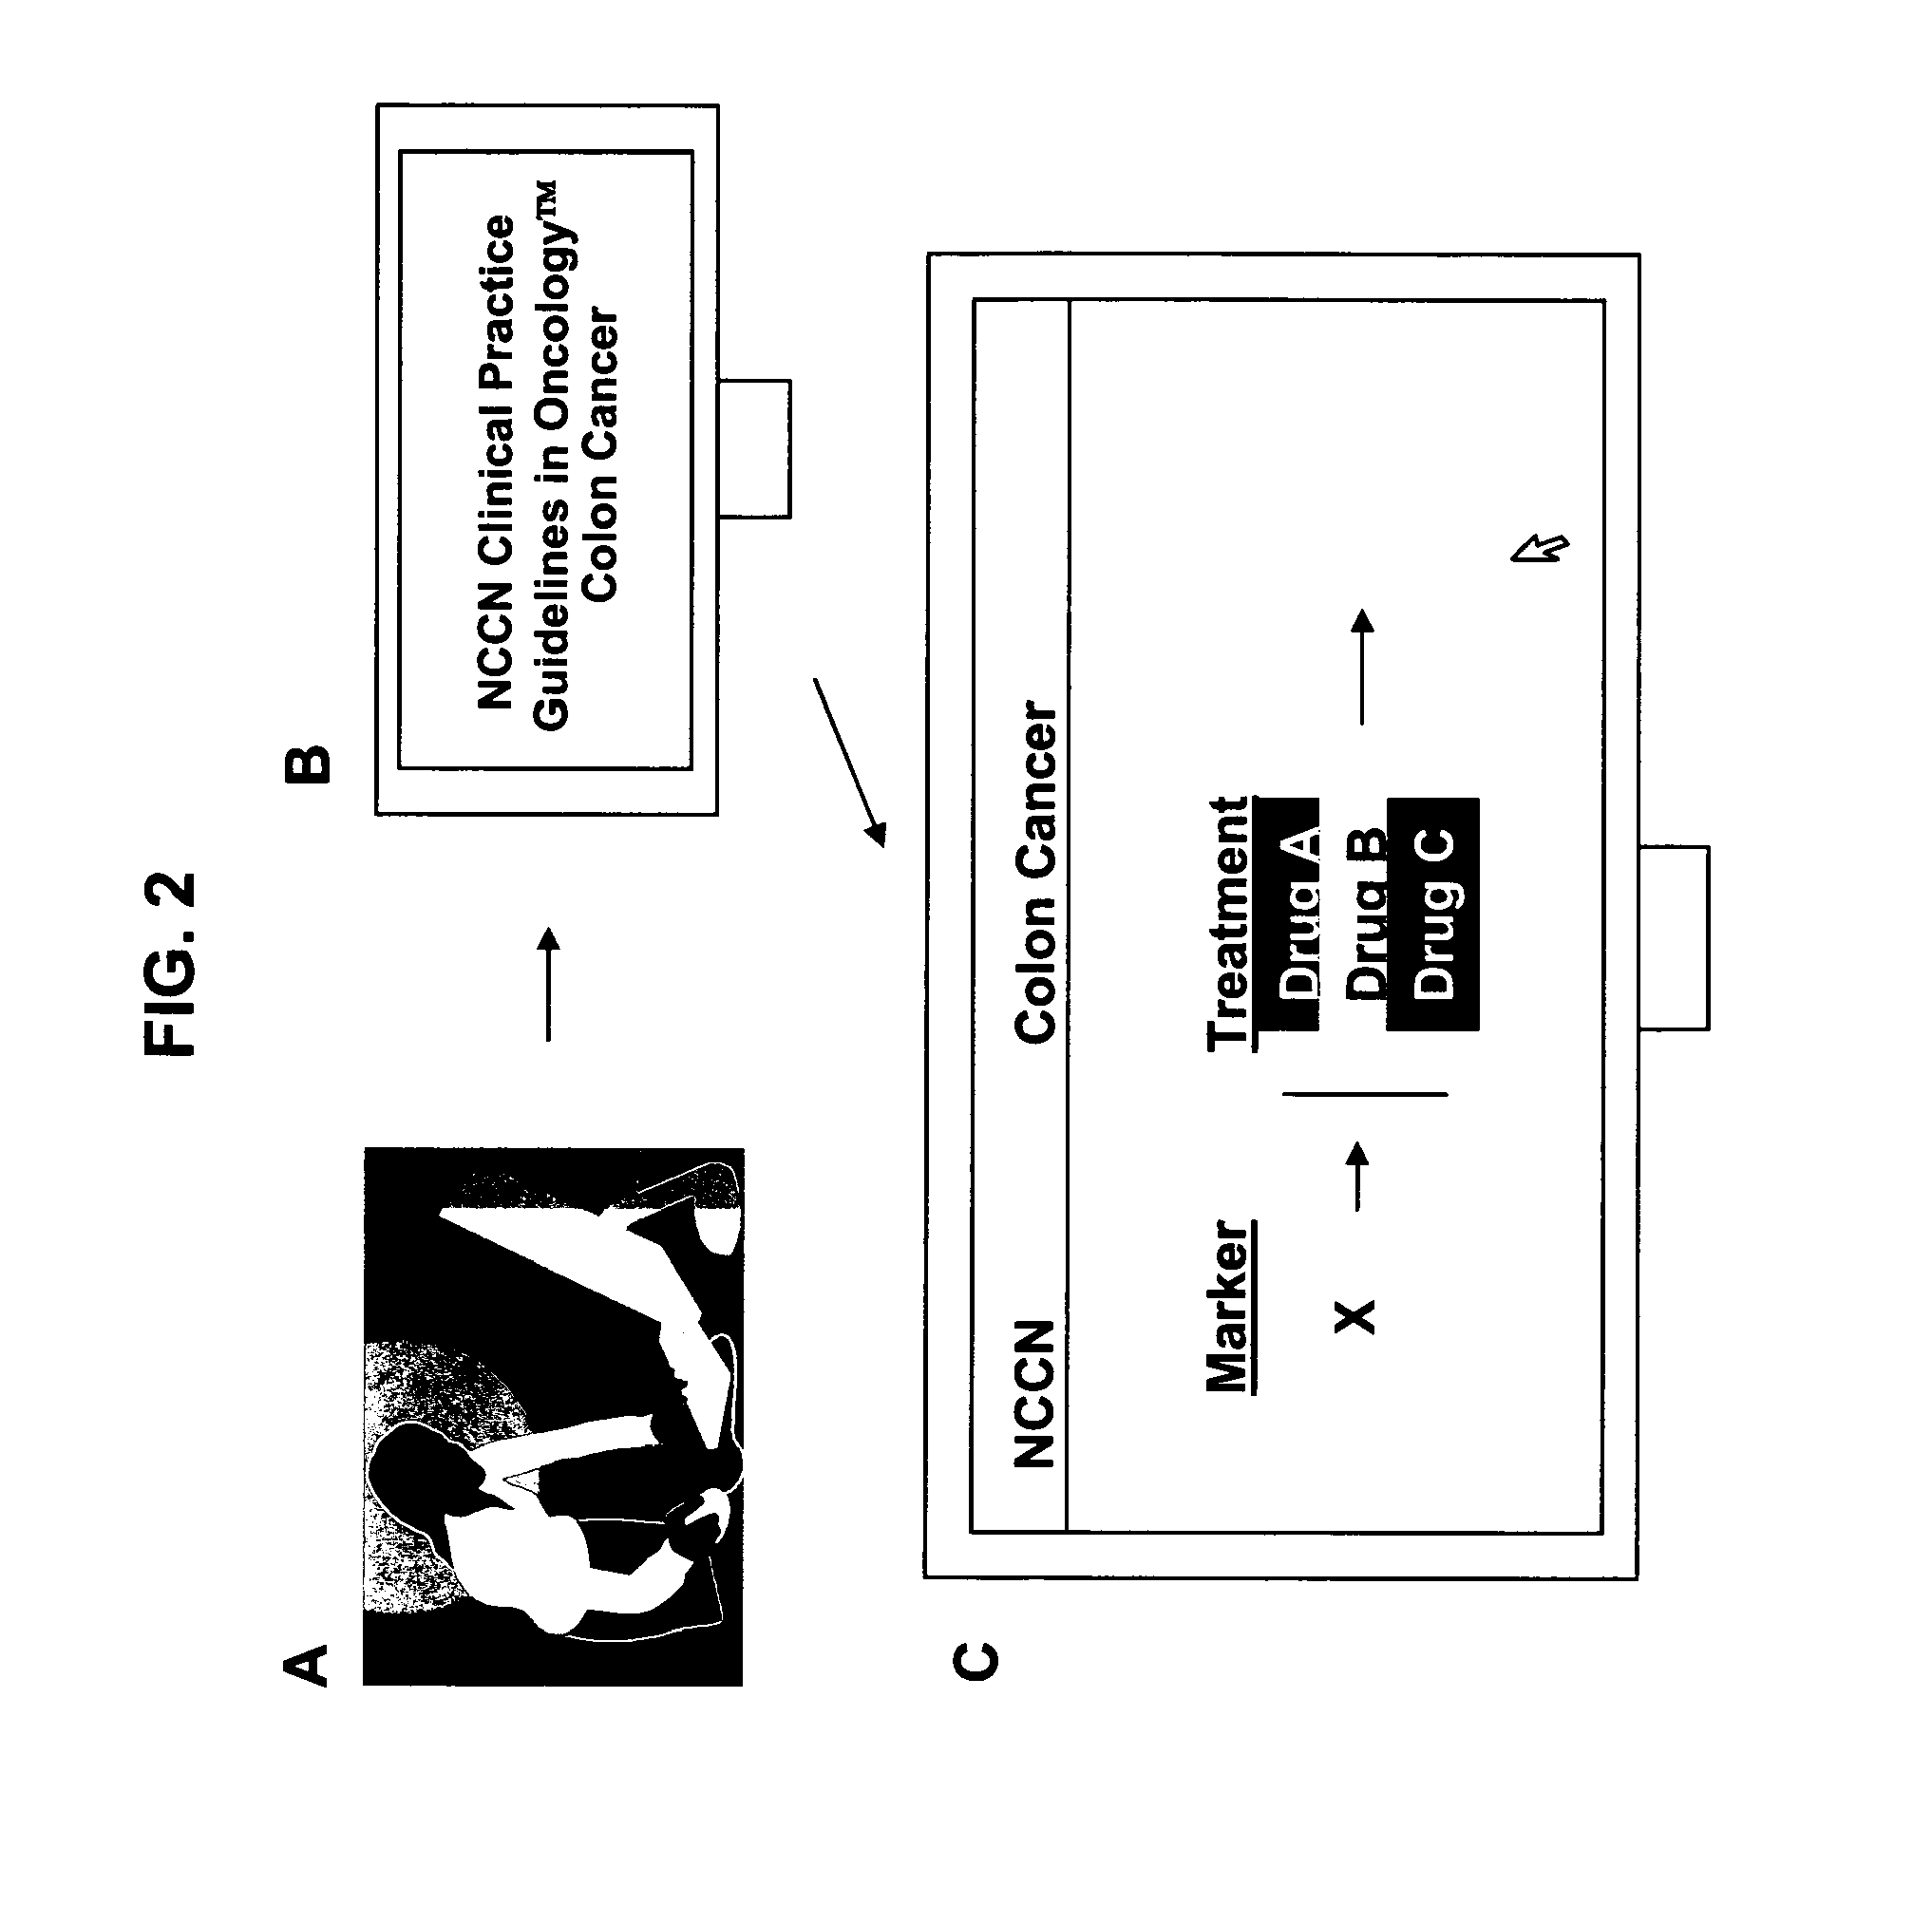 Methods for stratifying and annotating cancer drug treament options